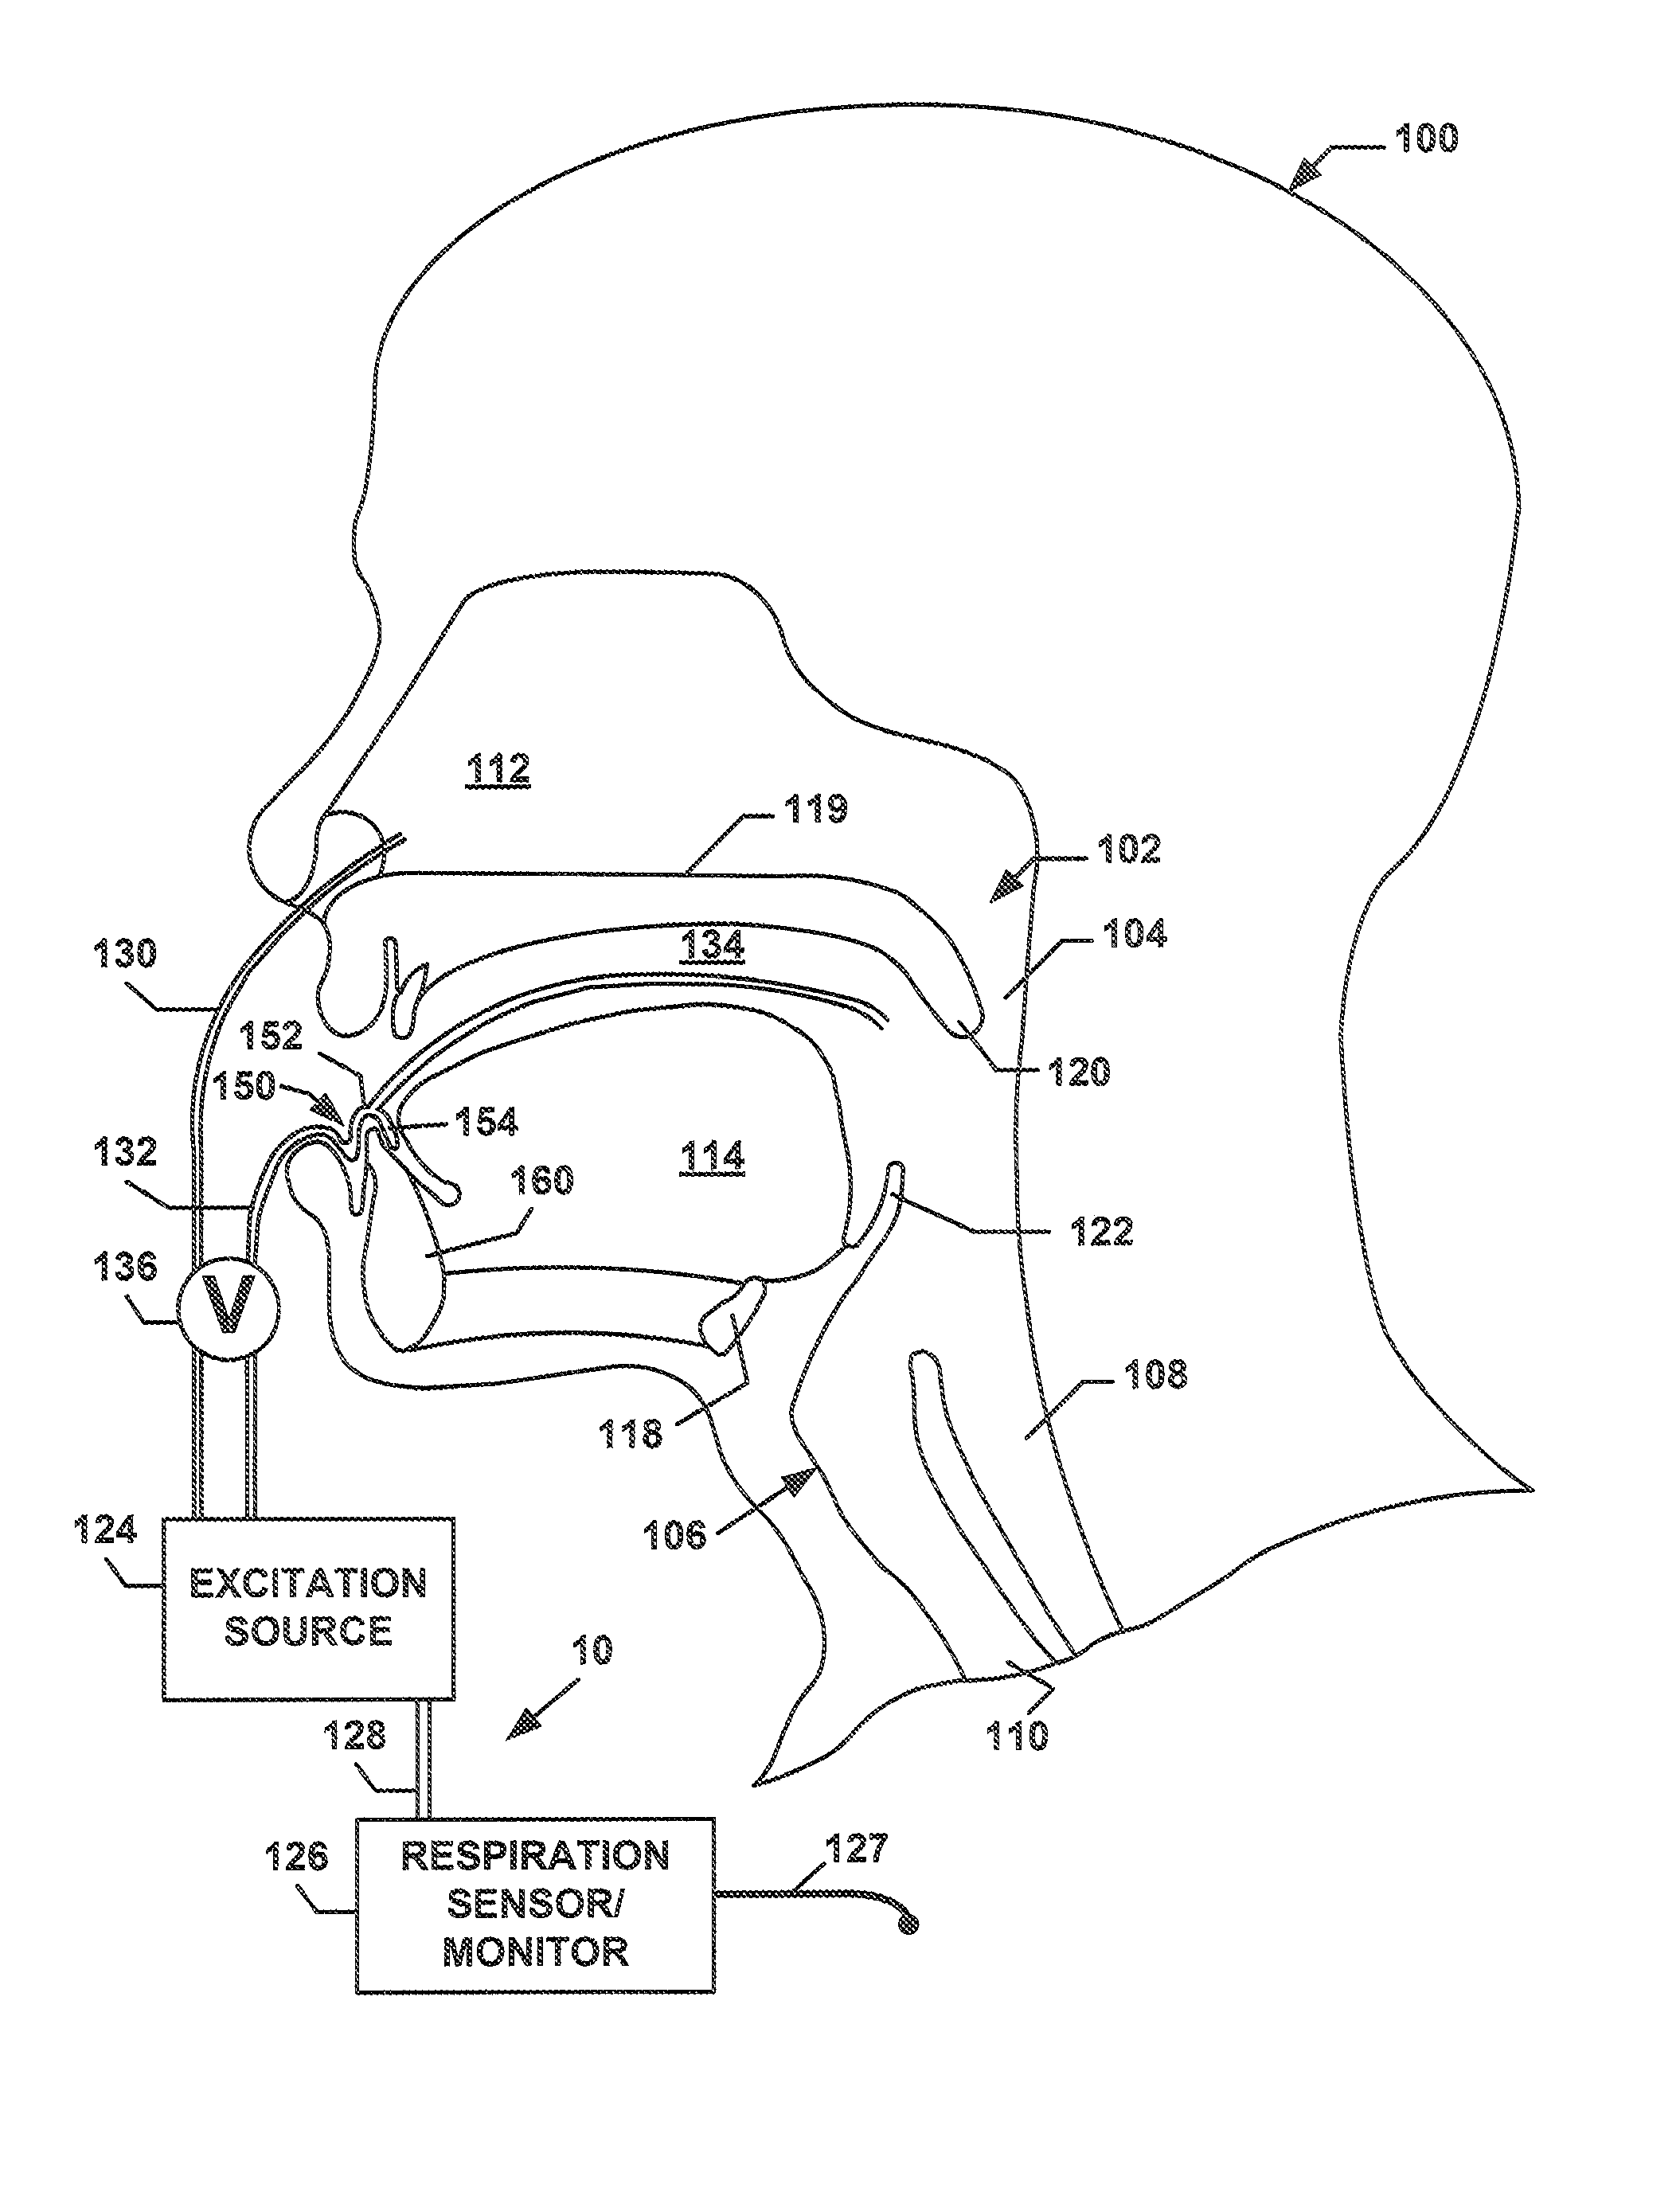 Discontinuous Positive Airway Pressure Device And Method Of Reducing Sleep Disordered Breathing Events